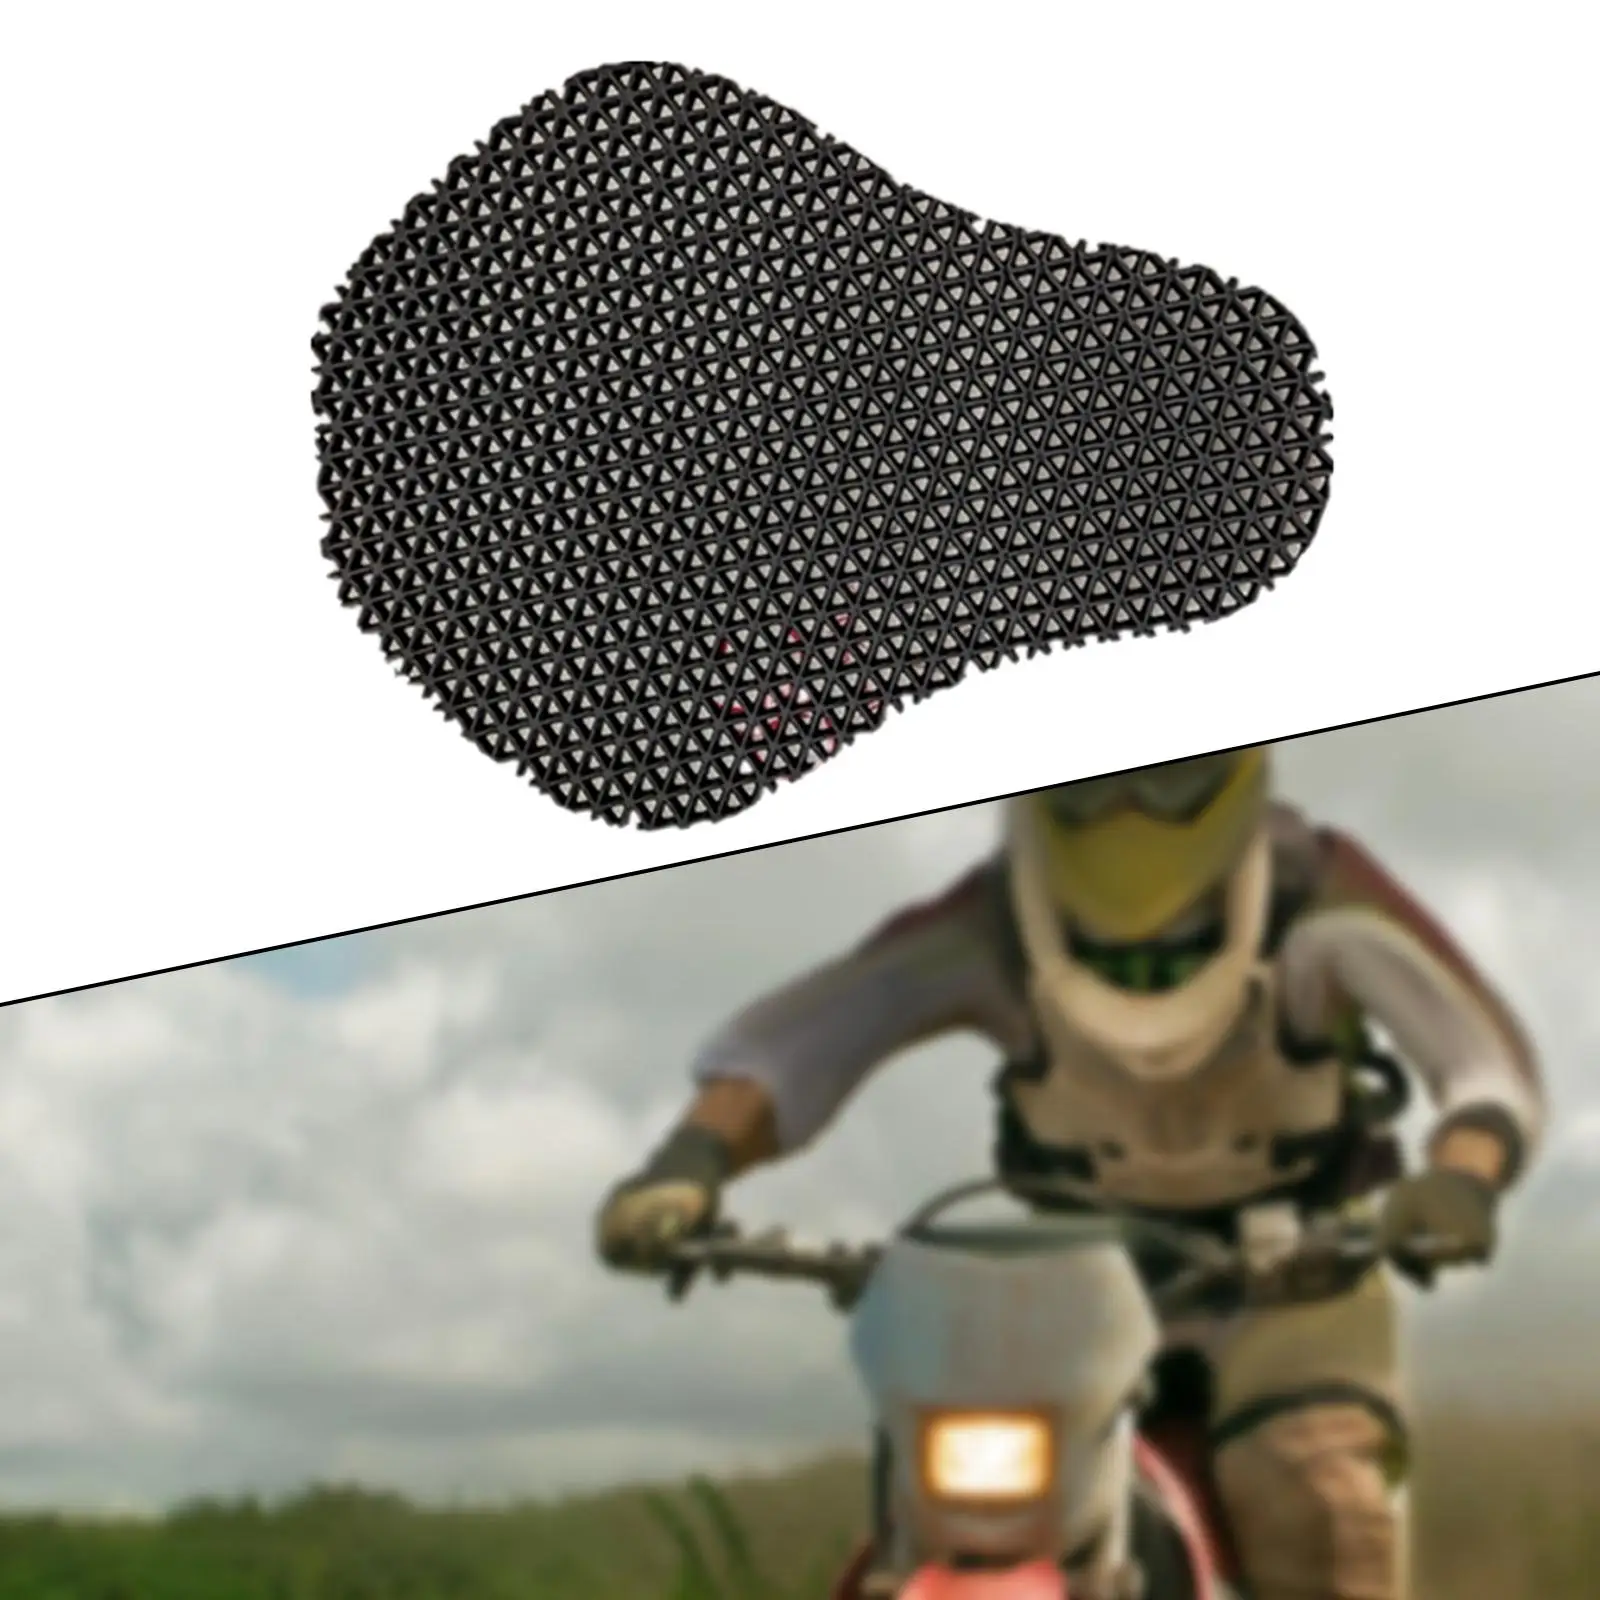 Motorcycle Jacket Insert Chest Equipment EVA Protective Gear Protector for